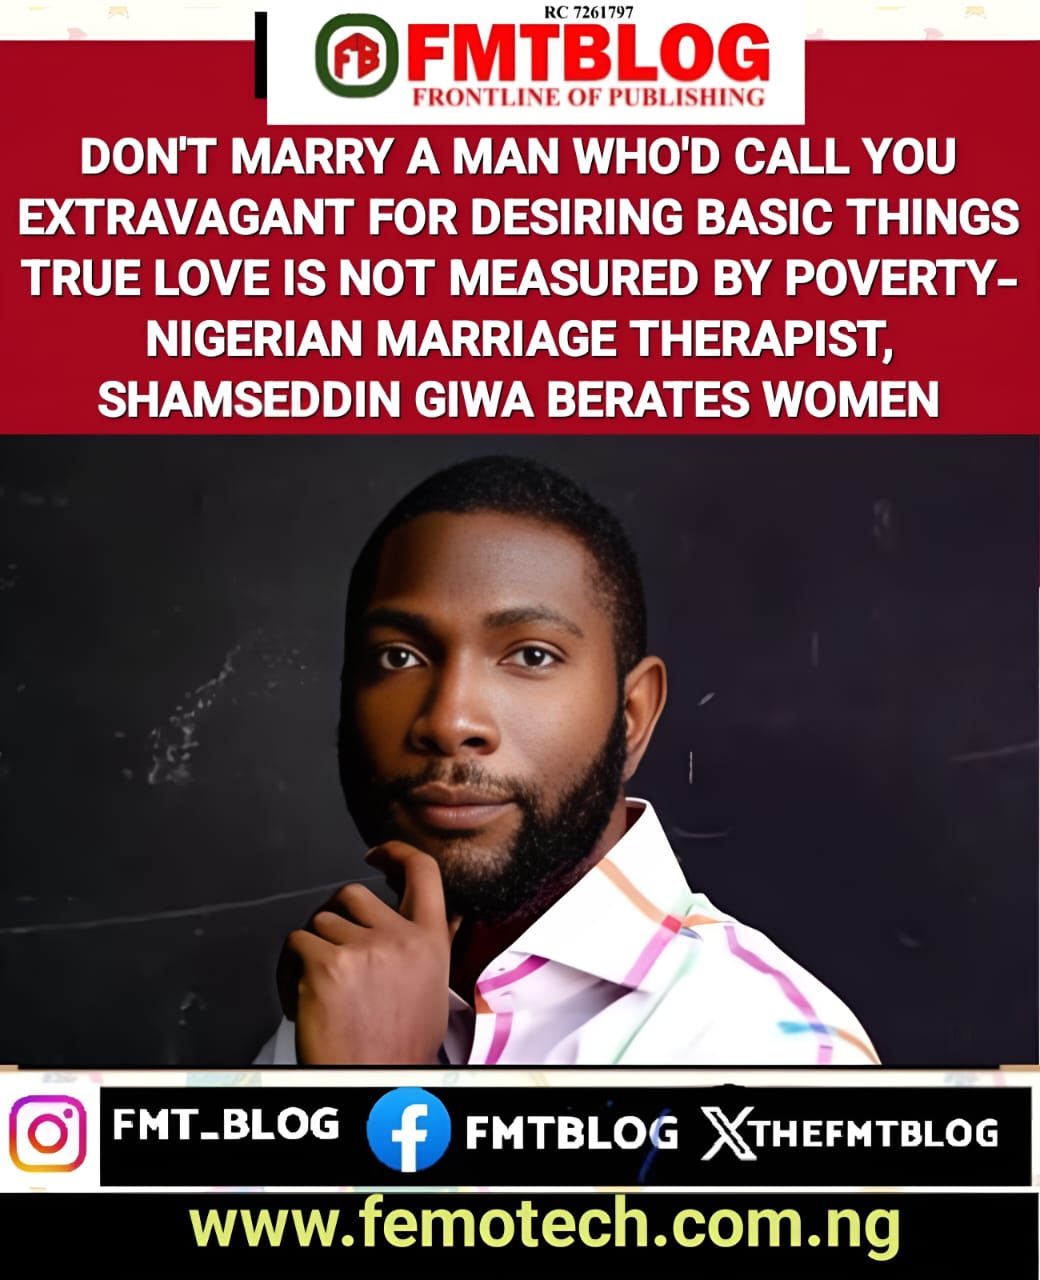 Don’t Marry A Man Who’d Call You Extravagant For Desiring Basic Things, True Love Is Not Measured By Poverty- Nigerian Marriage Therapist, Shamseddin Giwa Berates Women